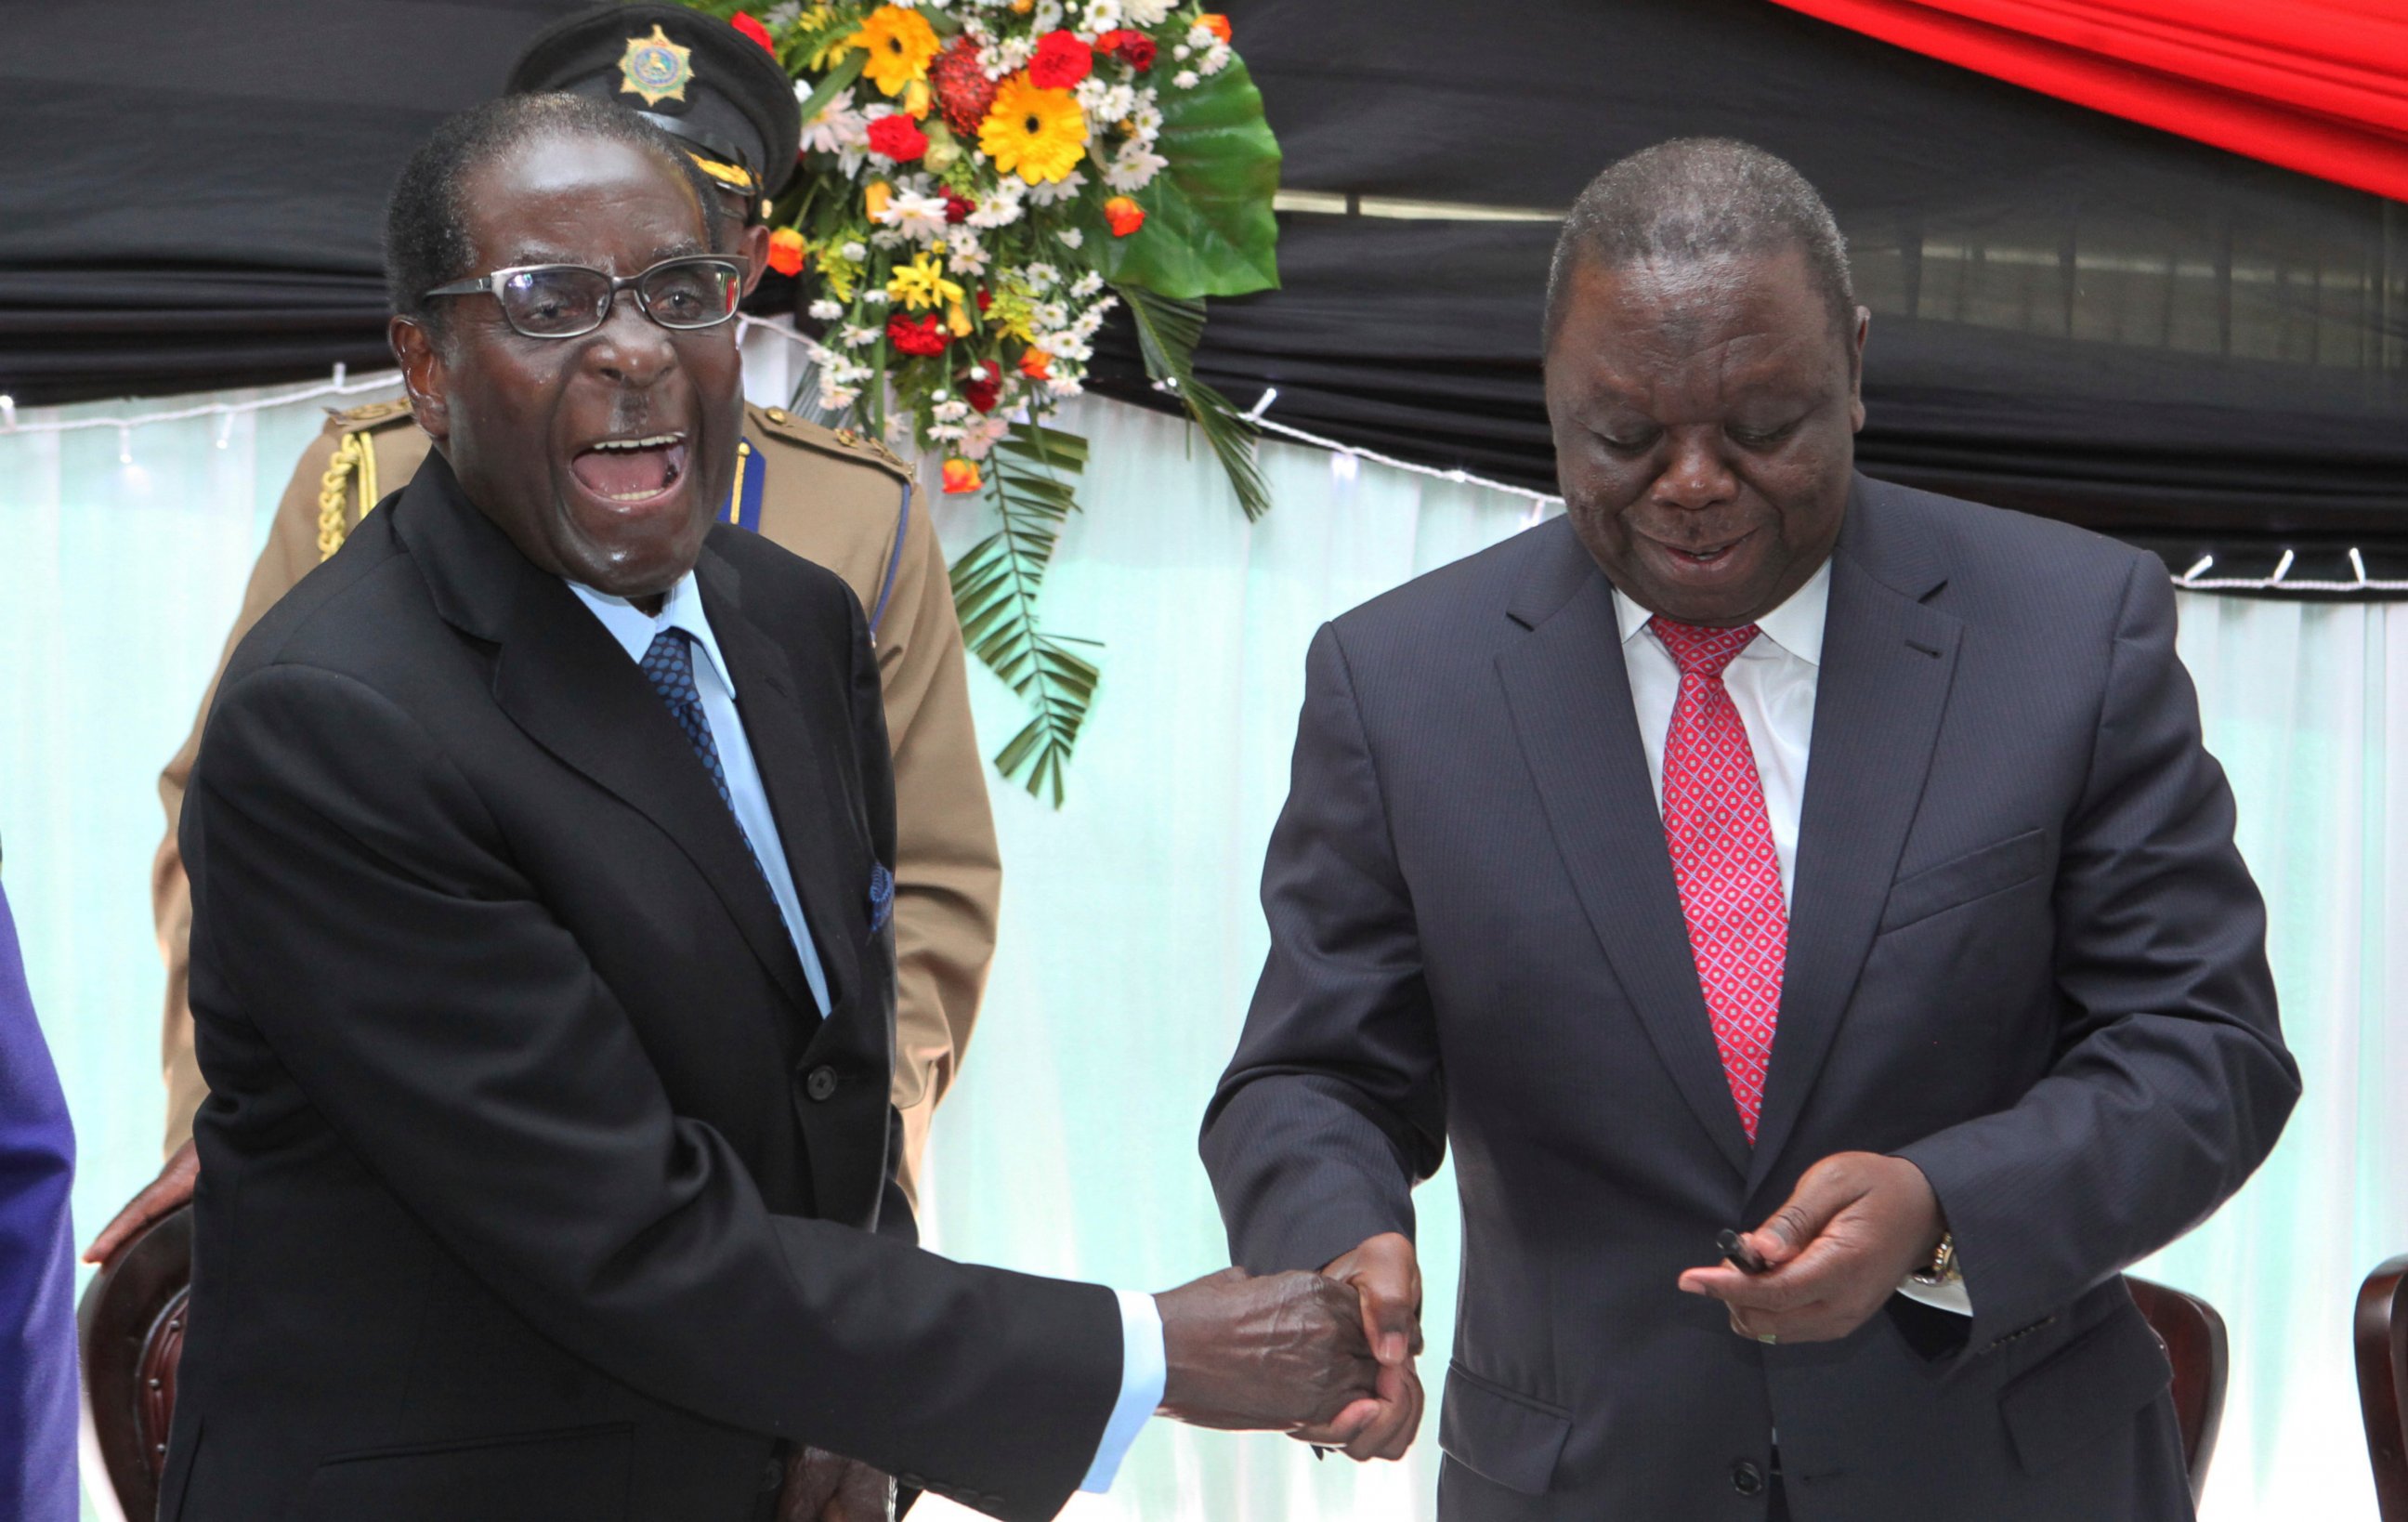 FILE - In this Wednesday, May 22, 2013 file photo Zimbabwean President Robert Mugabe, left, shakes hands with Prime Minister Morgan Tsvangirai after he signed the new constitution into law at State house in Harare. On Friday, Sept. 6, 2019, Zimbabwe 